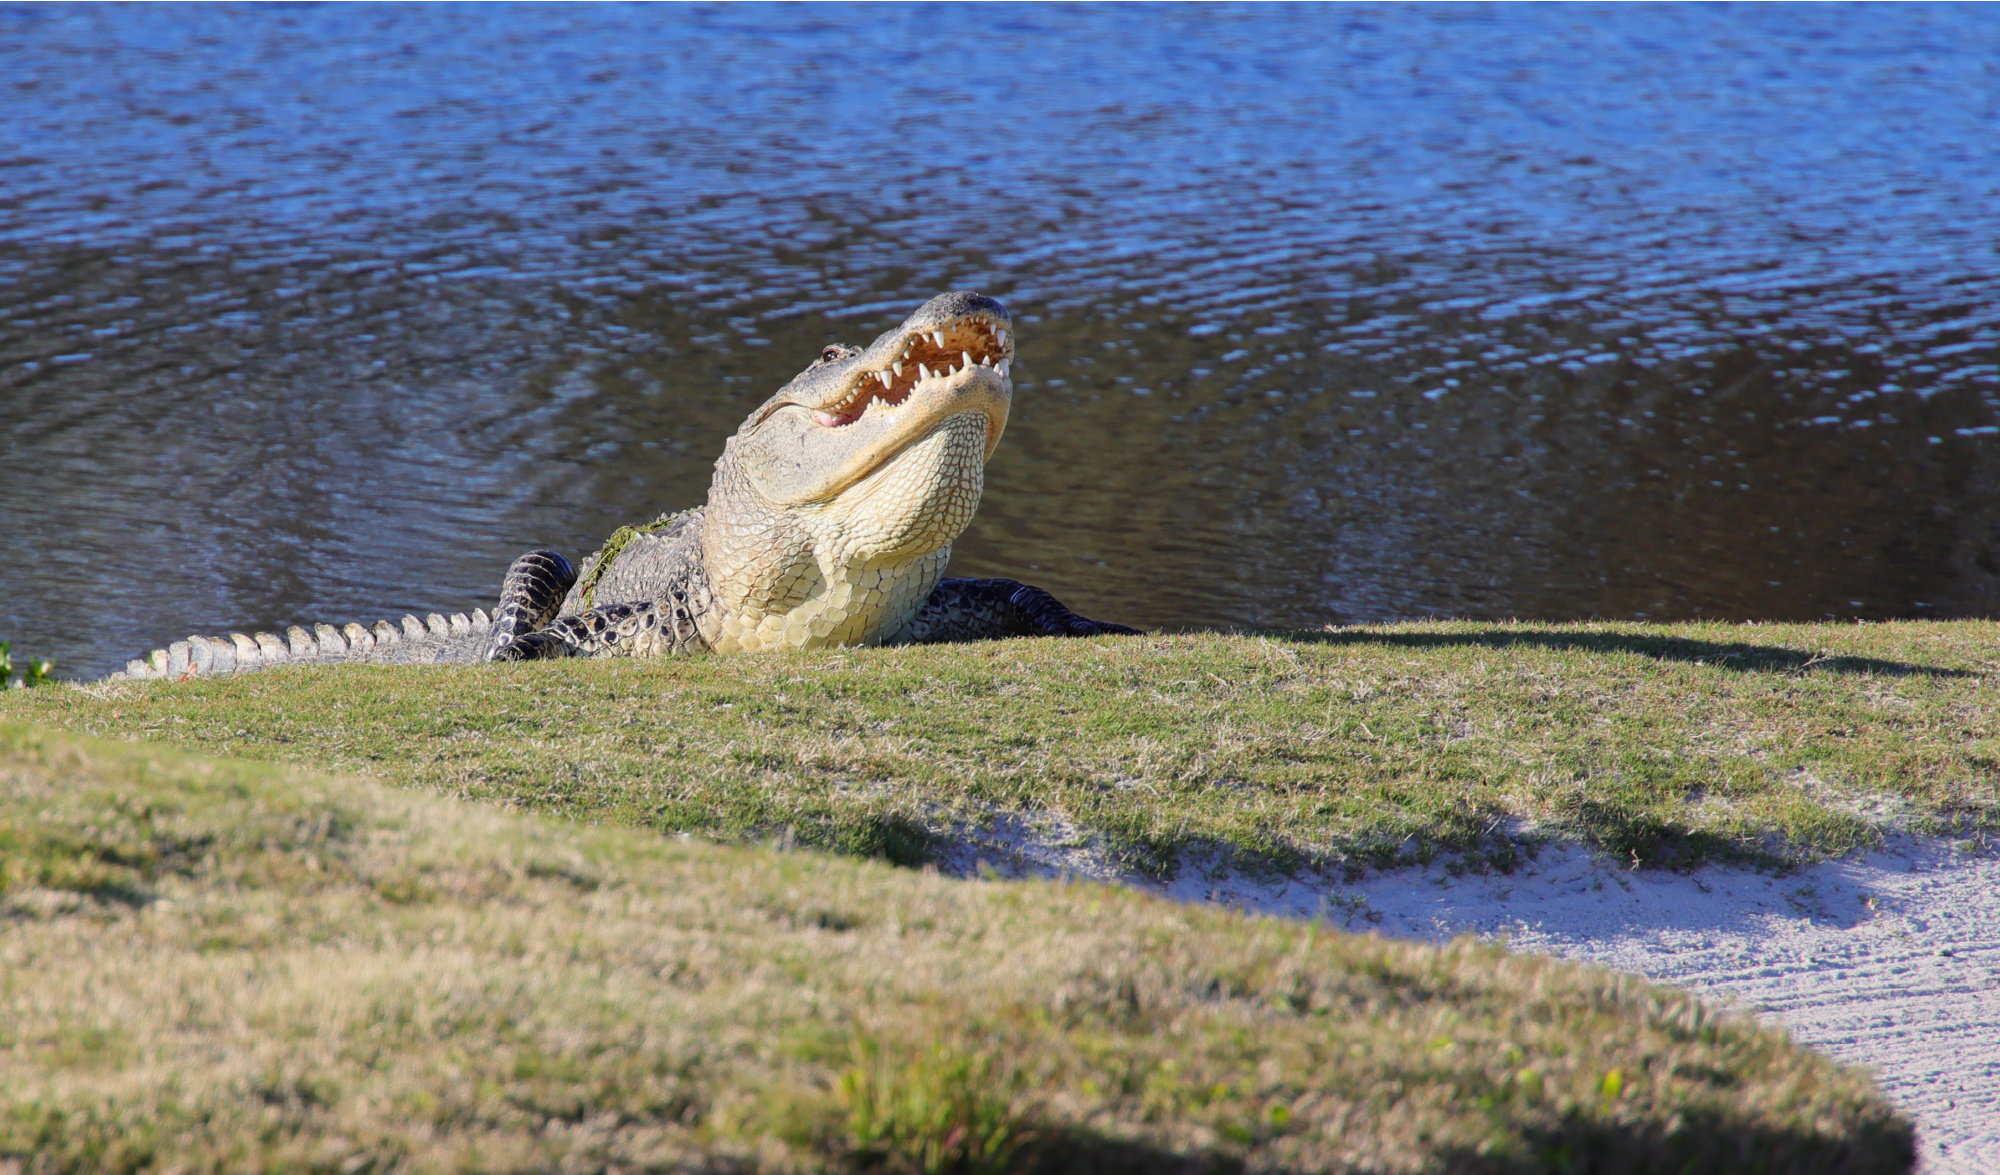 An alligator lays on a golf course.